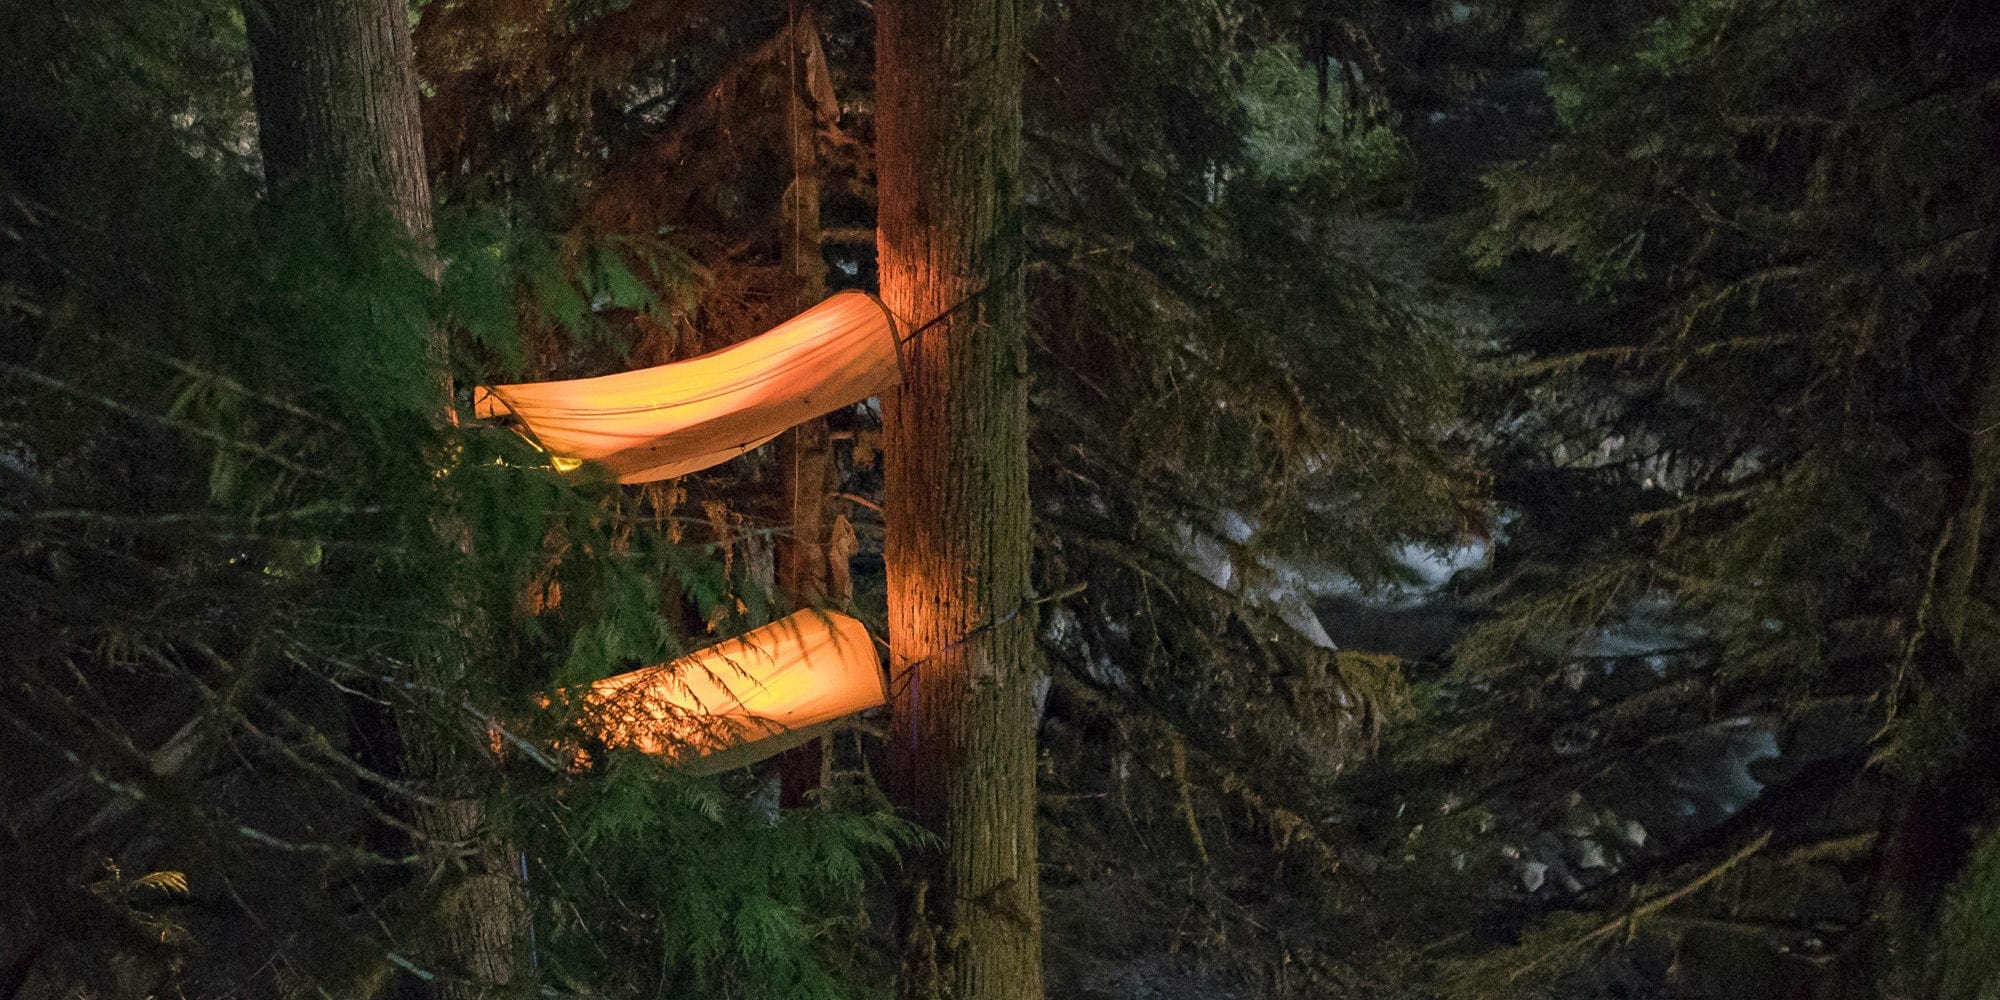 Lit-up hammocks high in the trees